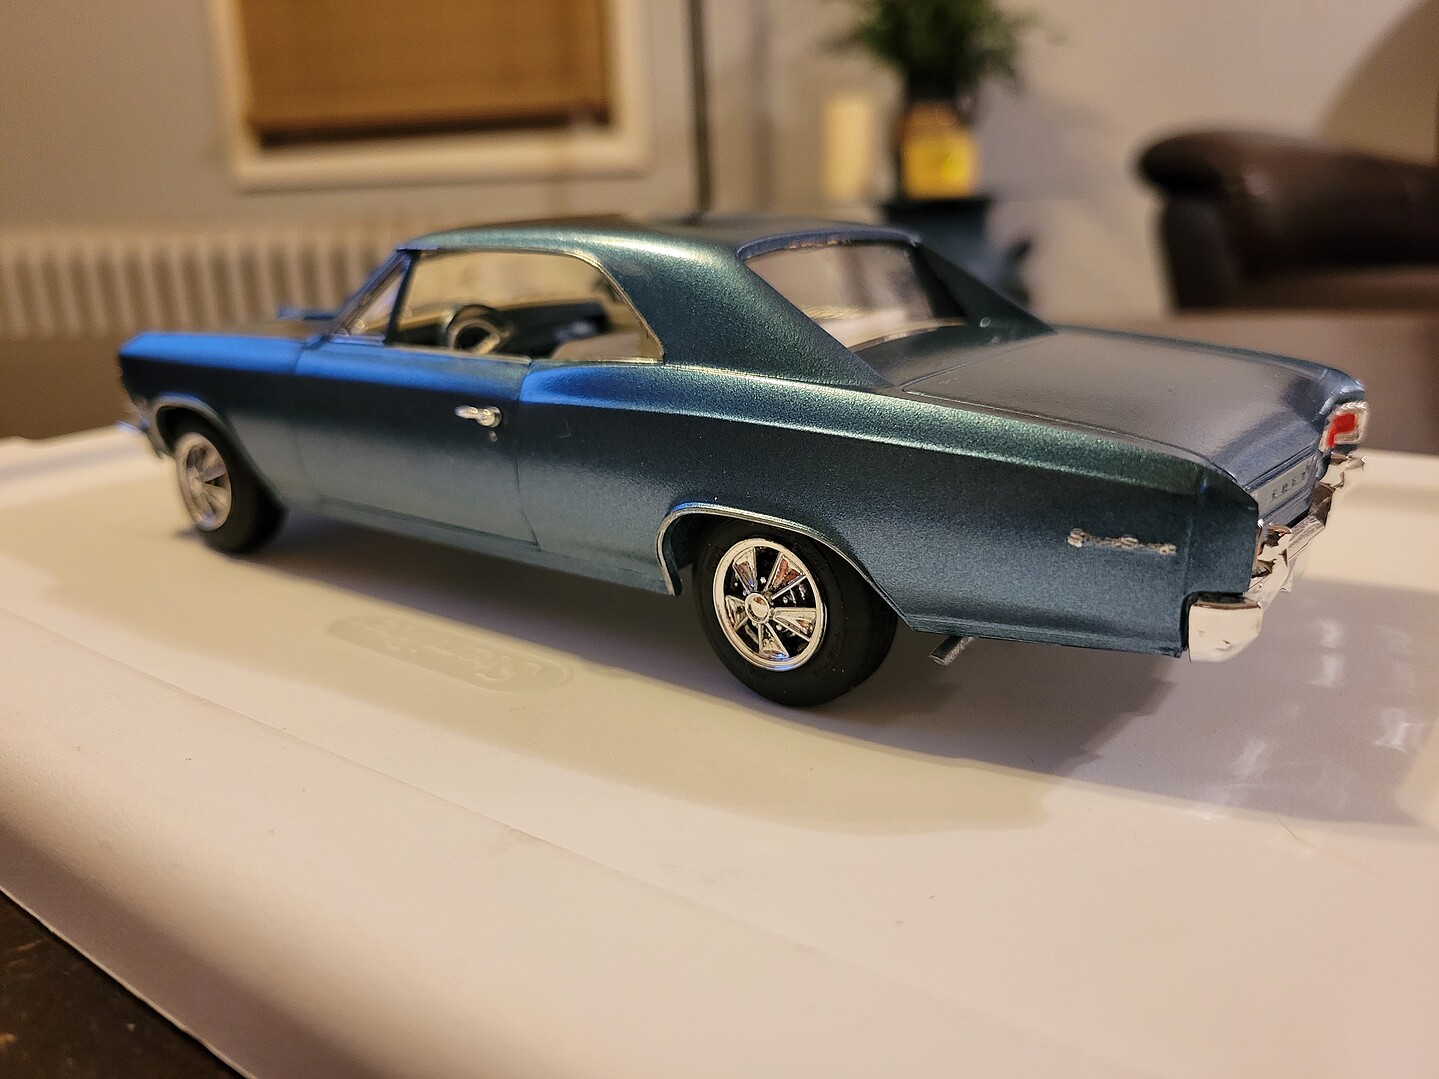 AMT 1/25 1966 Chevy Chevelle SS Model Kit